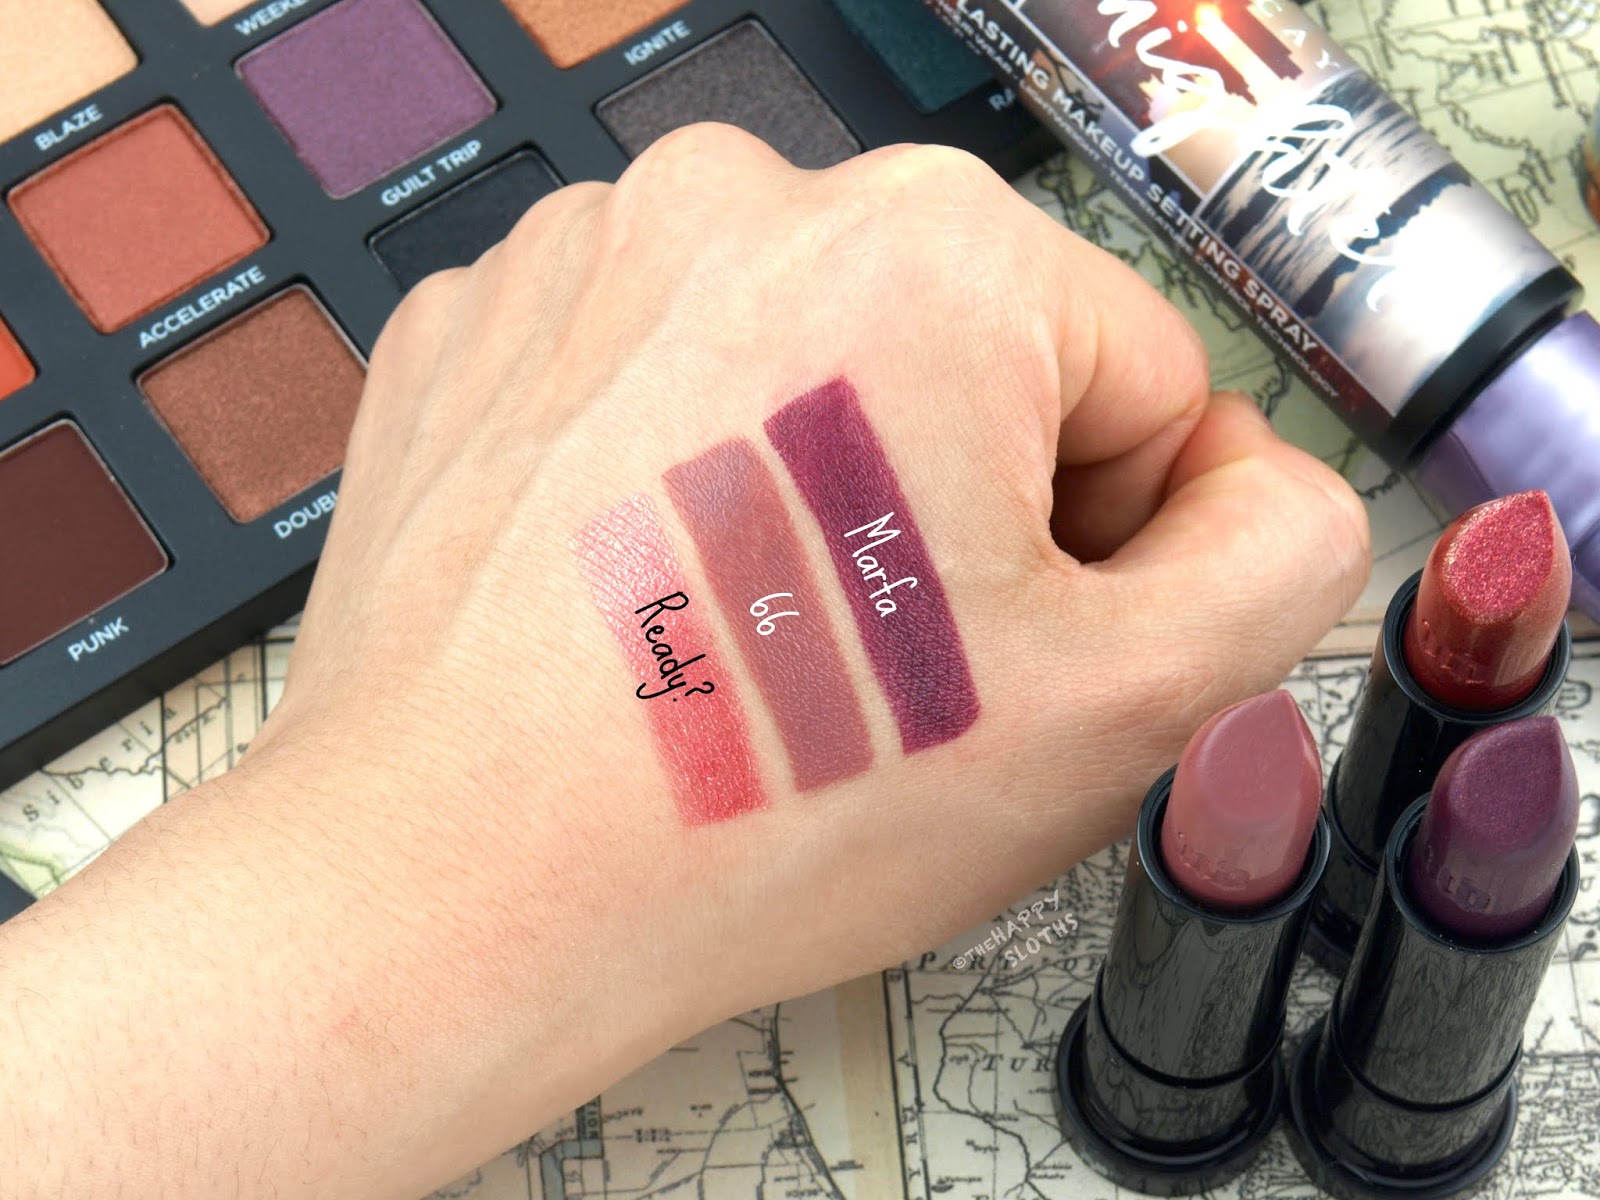 Urban Decay | Born to Run Vice Lipstick: Review and Swatches